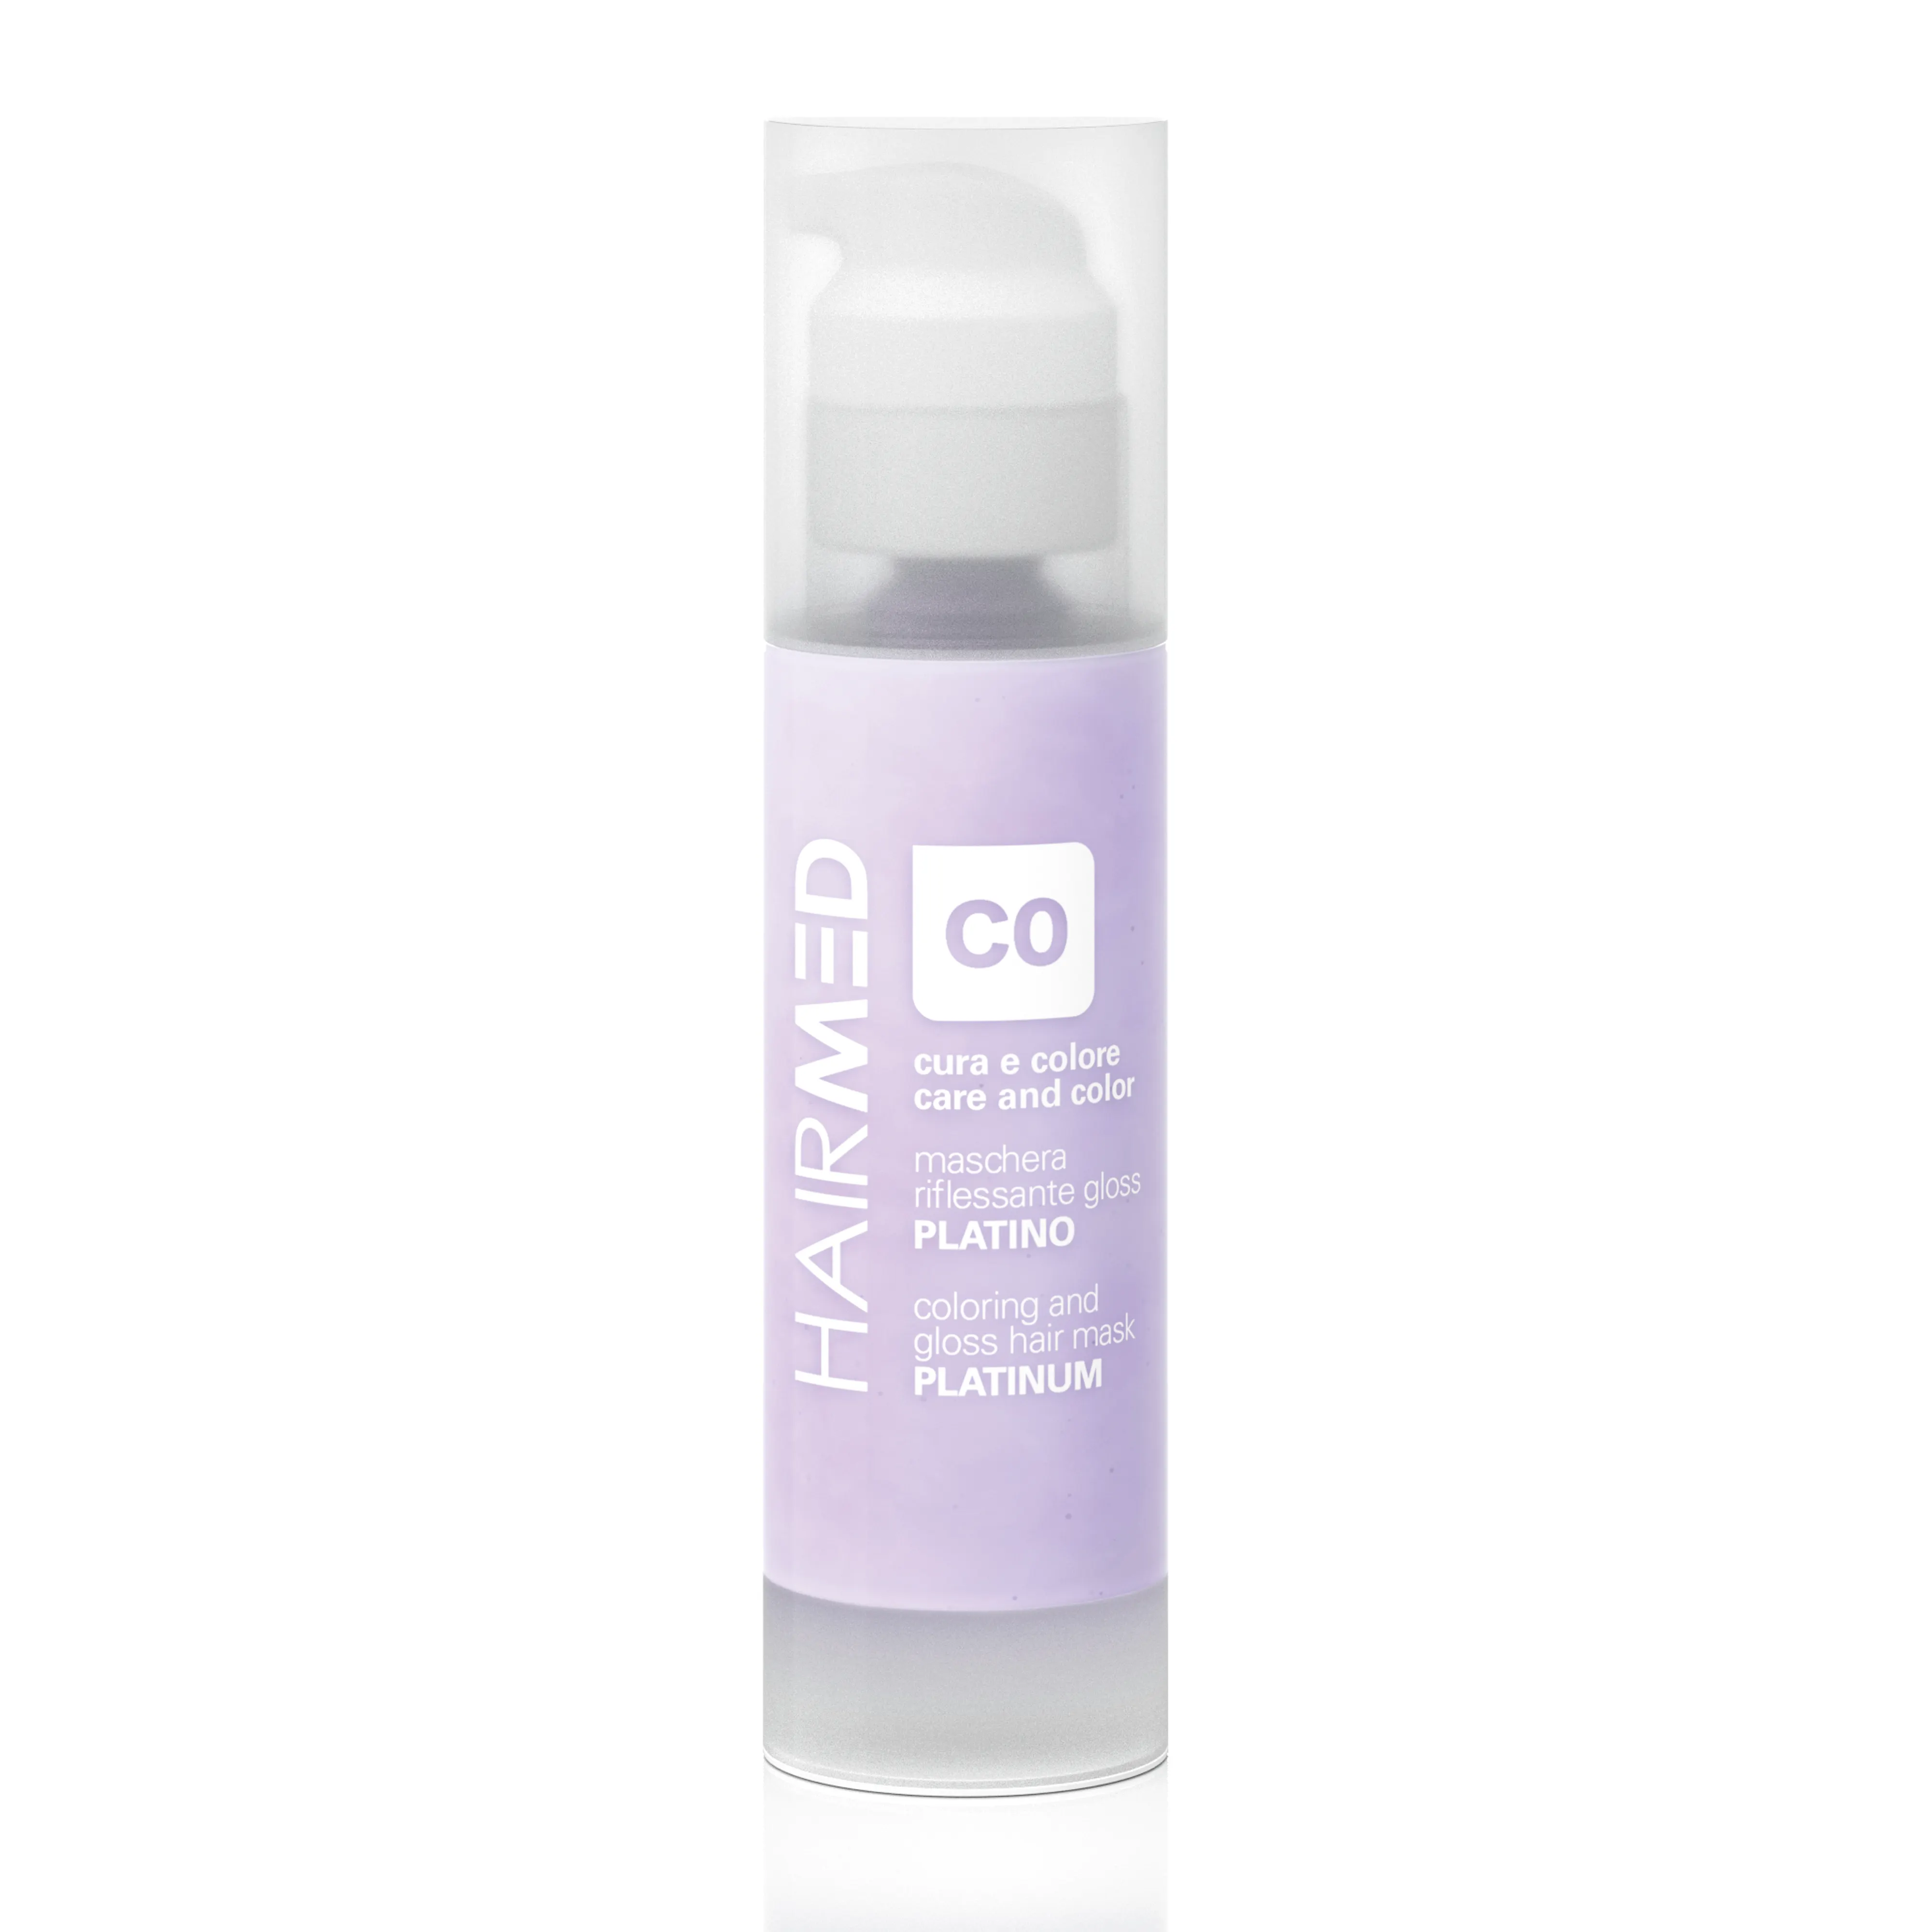 C0 - COLORING AND GLOSS MASK - PLATINUM 150 ml